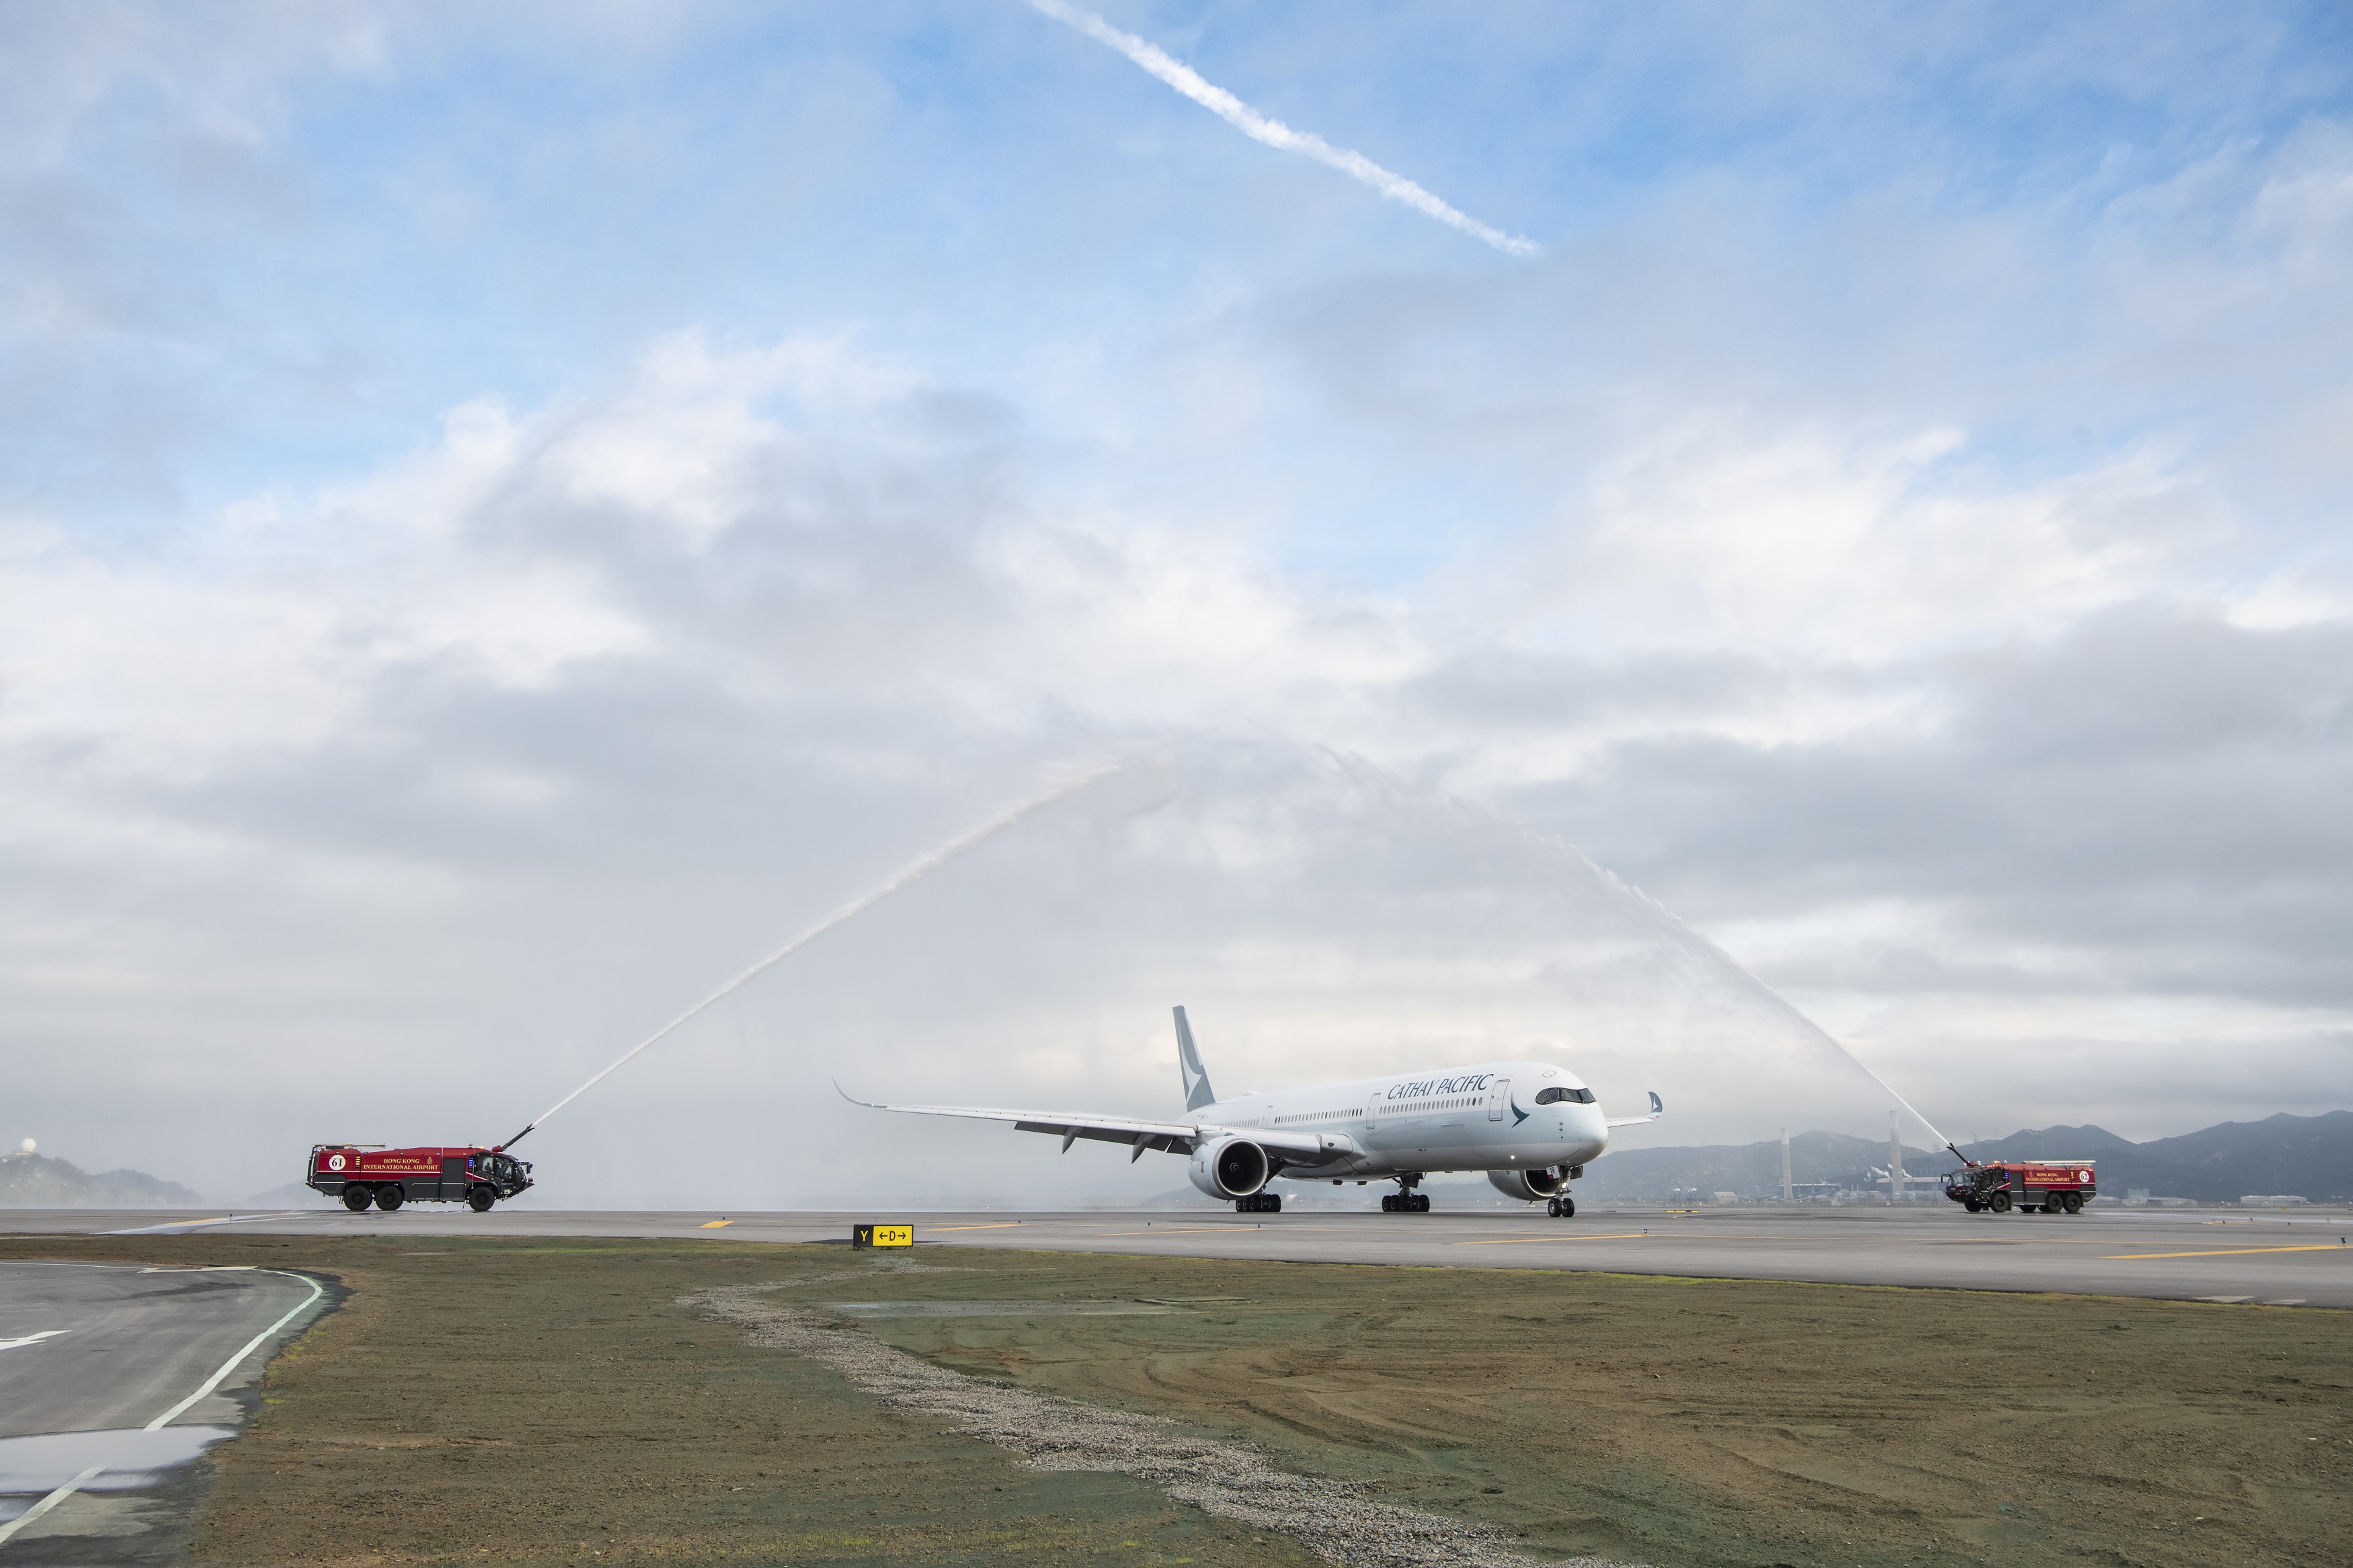 A water salute of the first arrival flight is conducted to mark the official commissioning of the Third Runway.